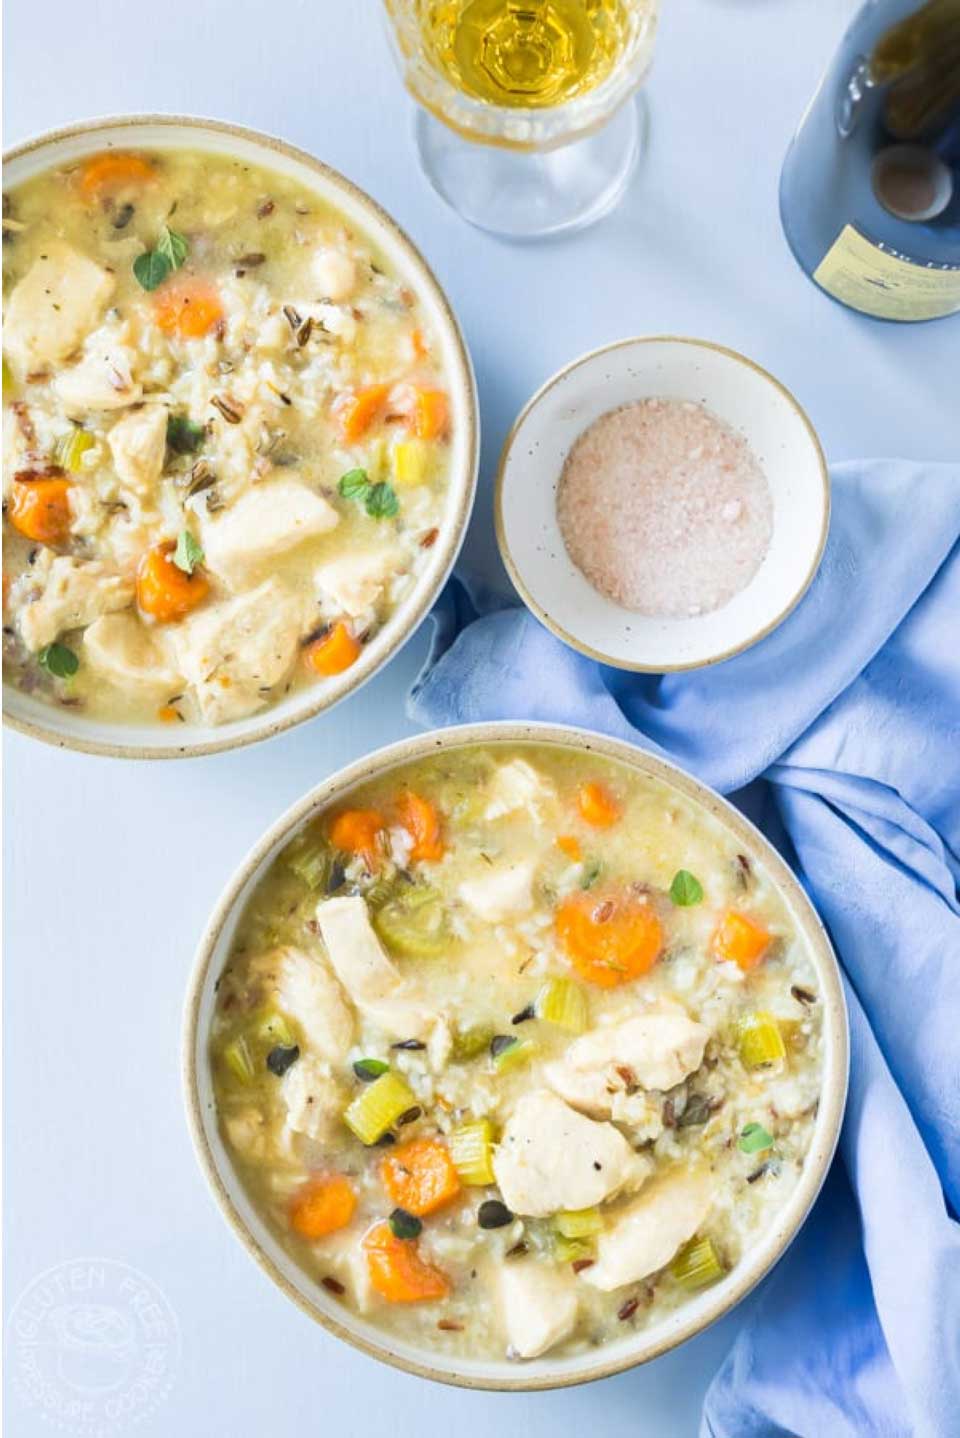 Classic flavors develop quickly and easily when you use your electric pressure cooker to make soups that might otherwise simmer for hours. We’ve got a terrific list of recipes that prove it, including this Pressure Cooker Chicken and Wild Rice Soup from Sheena at Gluten Free Pressure Cooker.